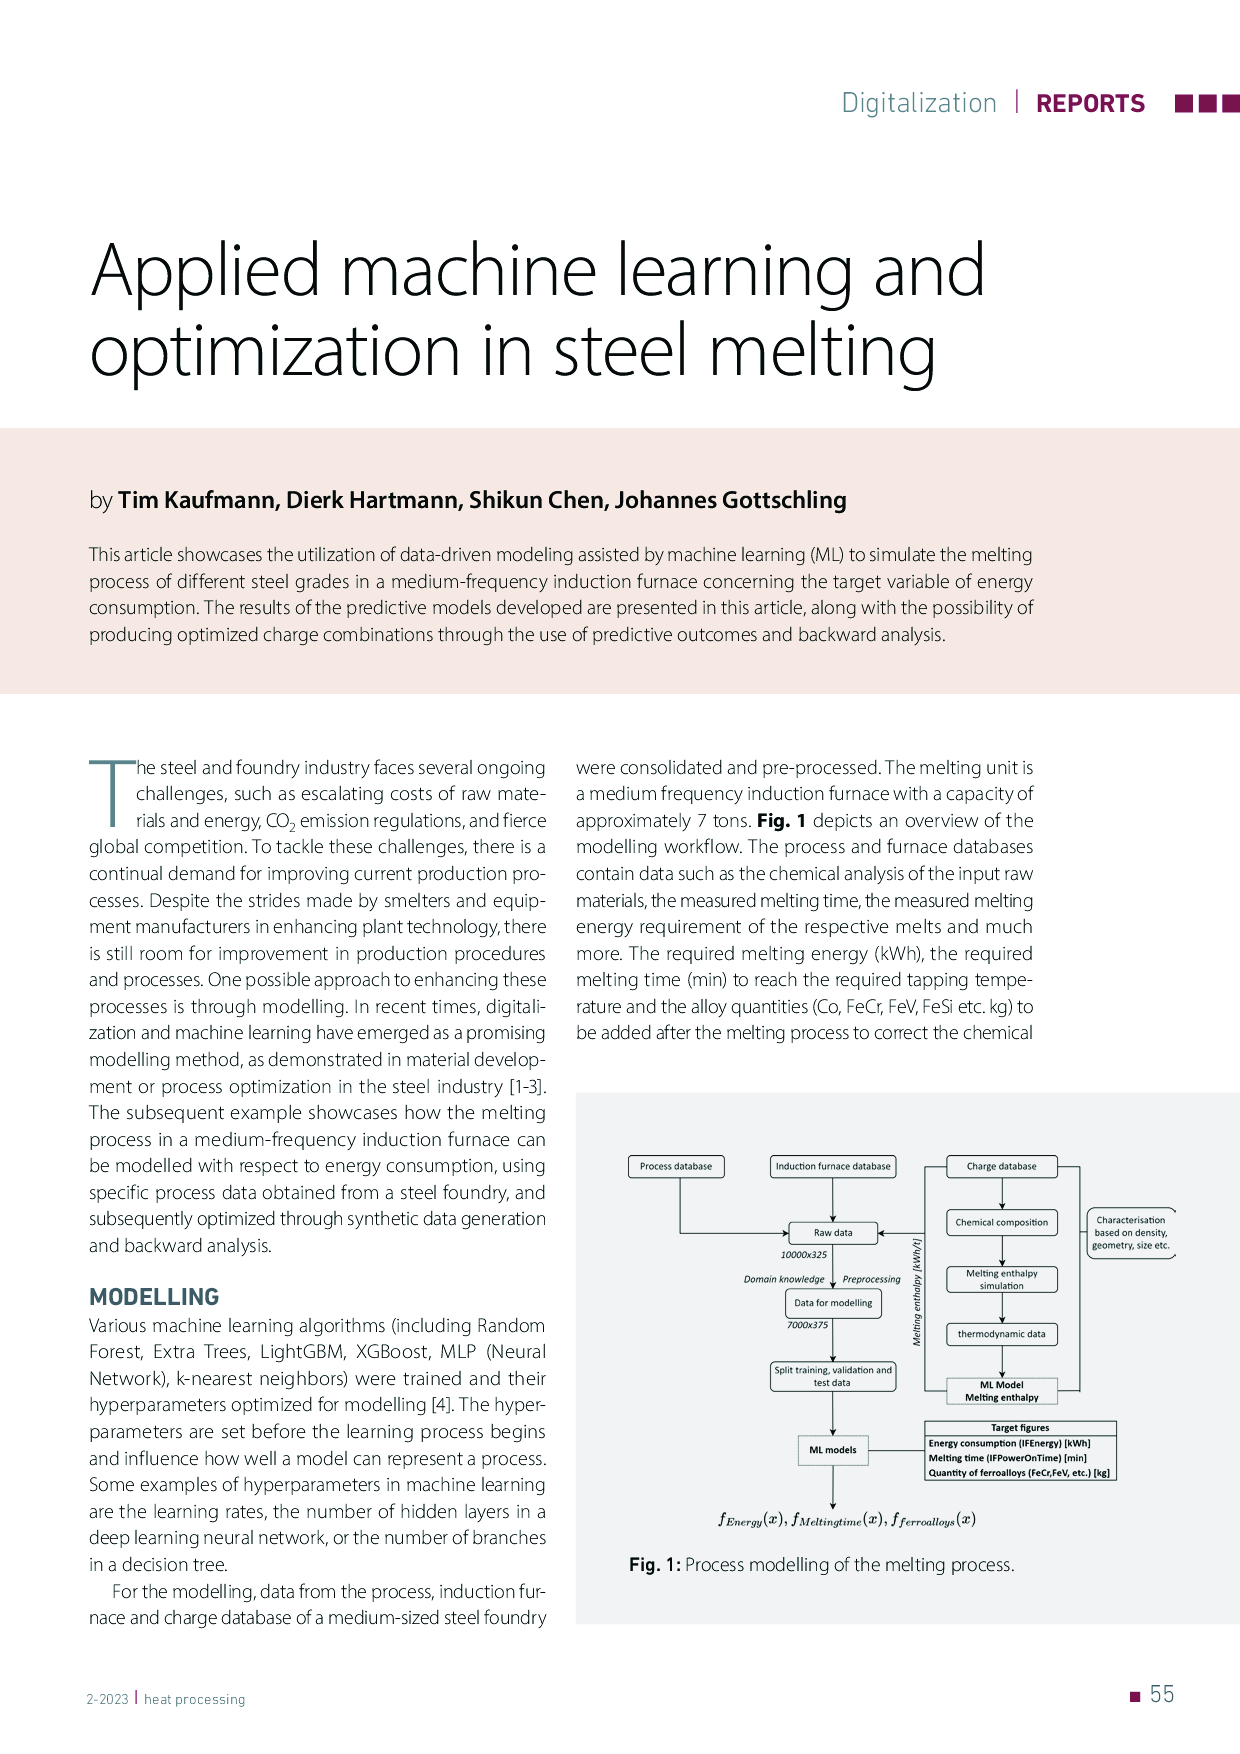 Applied machine learning and optimization in steel melting